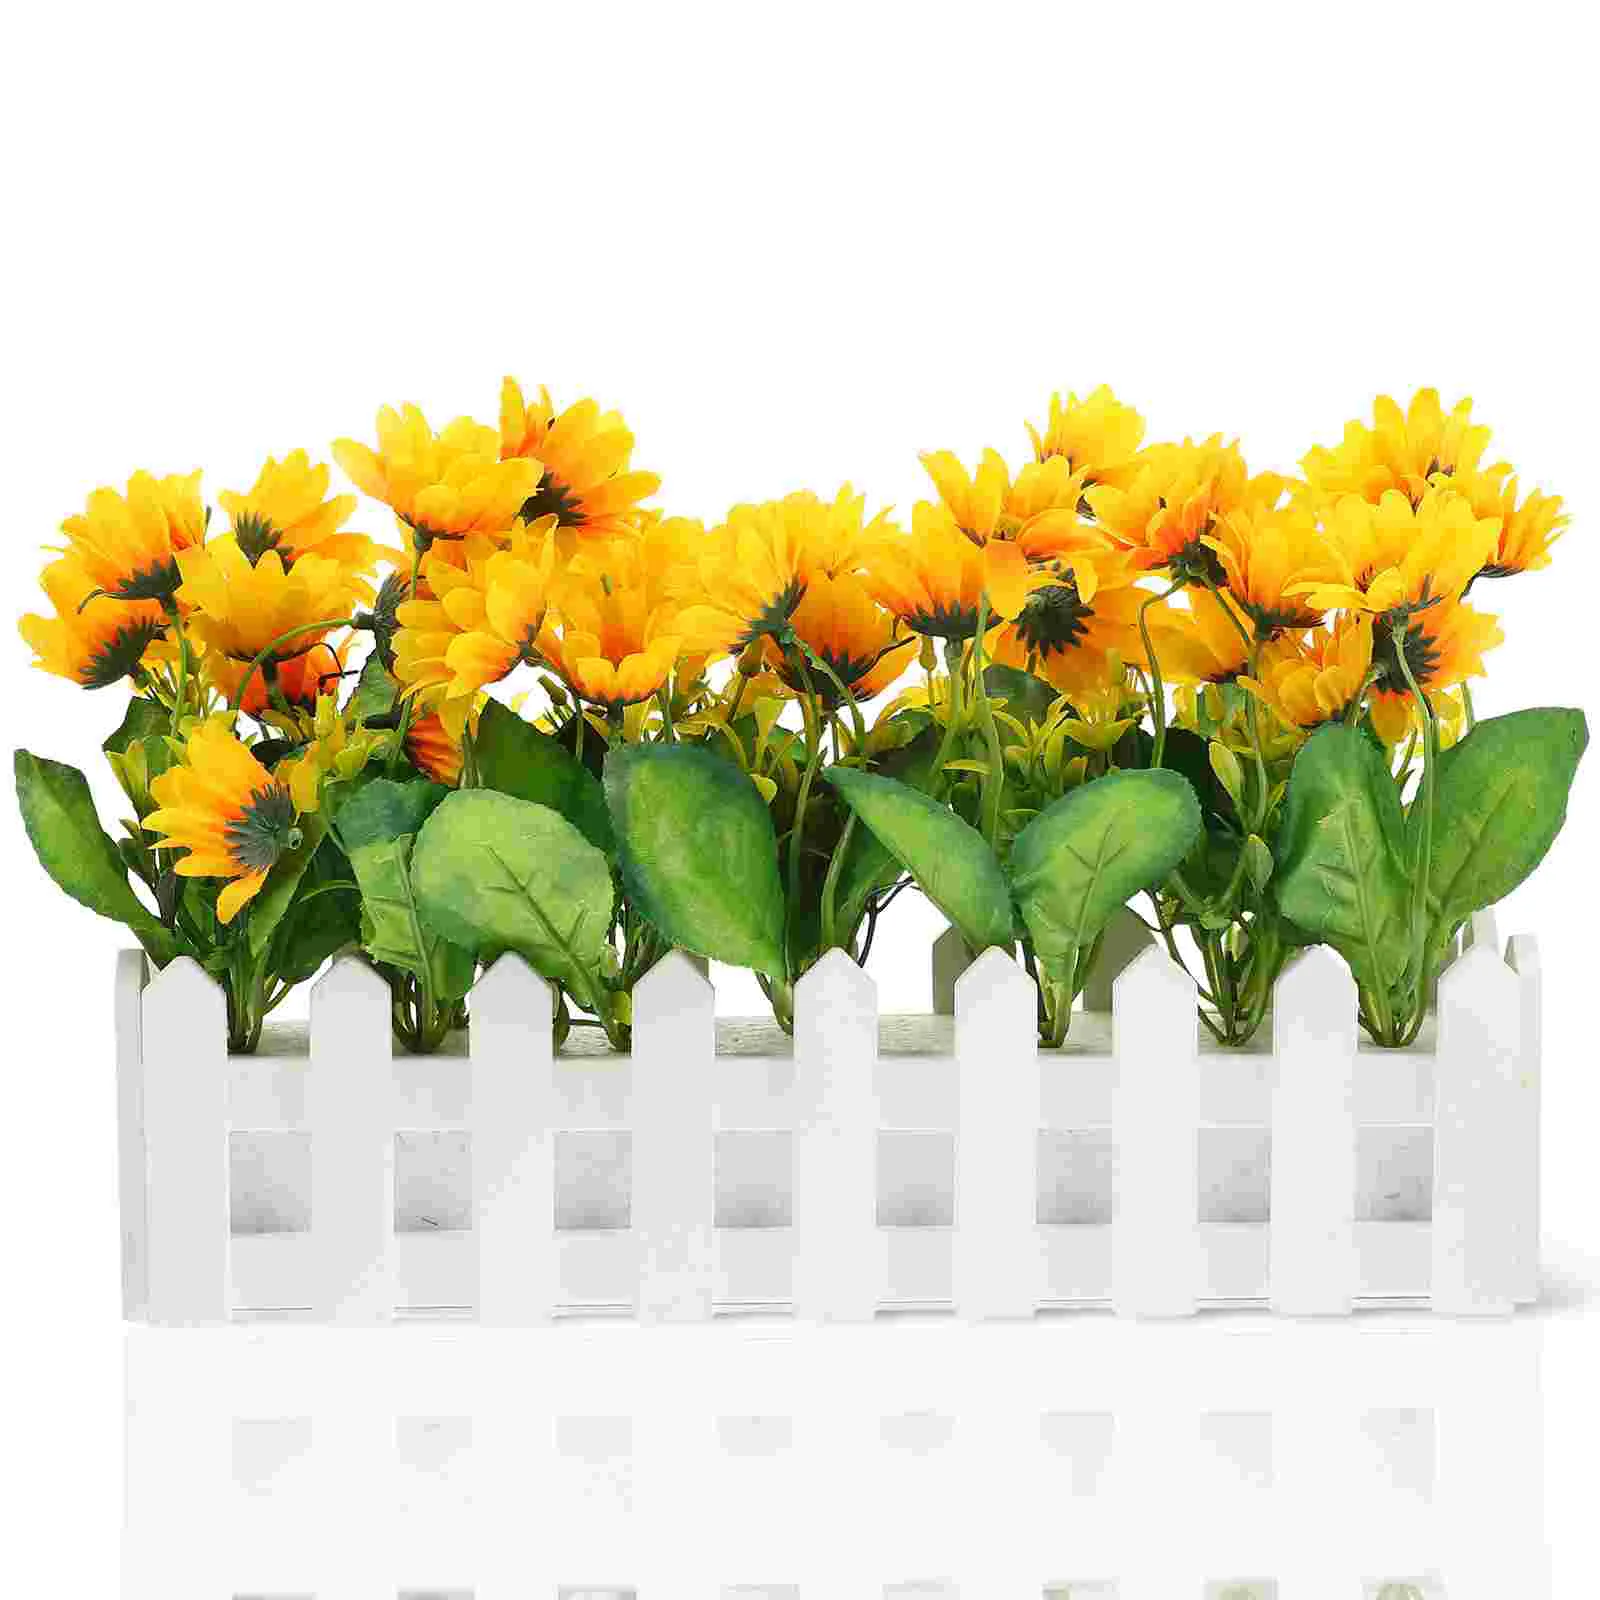 

Simulated Sunflower Artificial Flowers Indoors Adornment Classroom Decor Desktop Fake Bonsai Realistic Potted Plants Silk